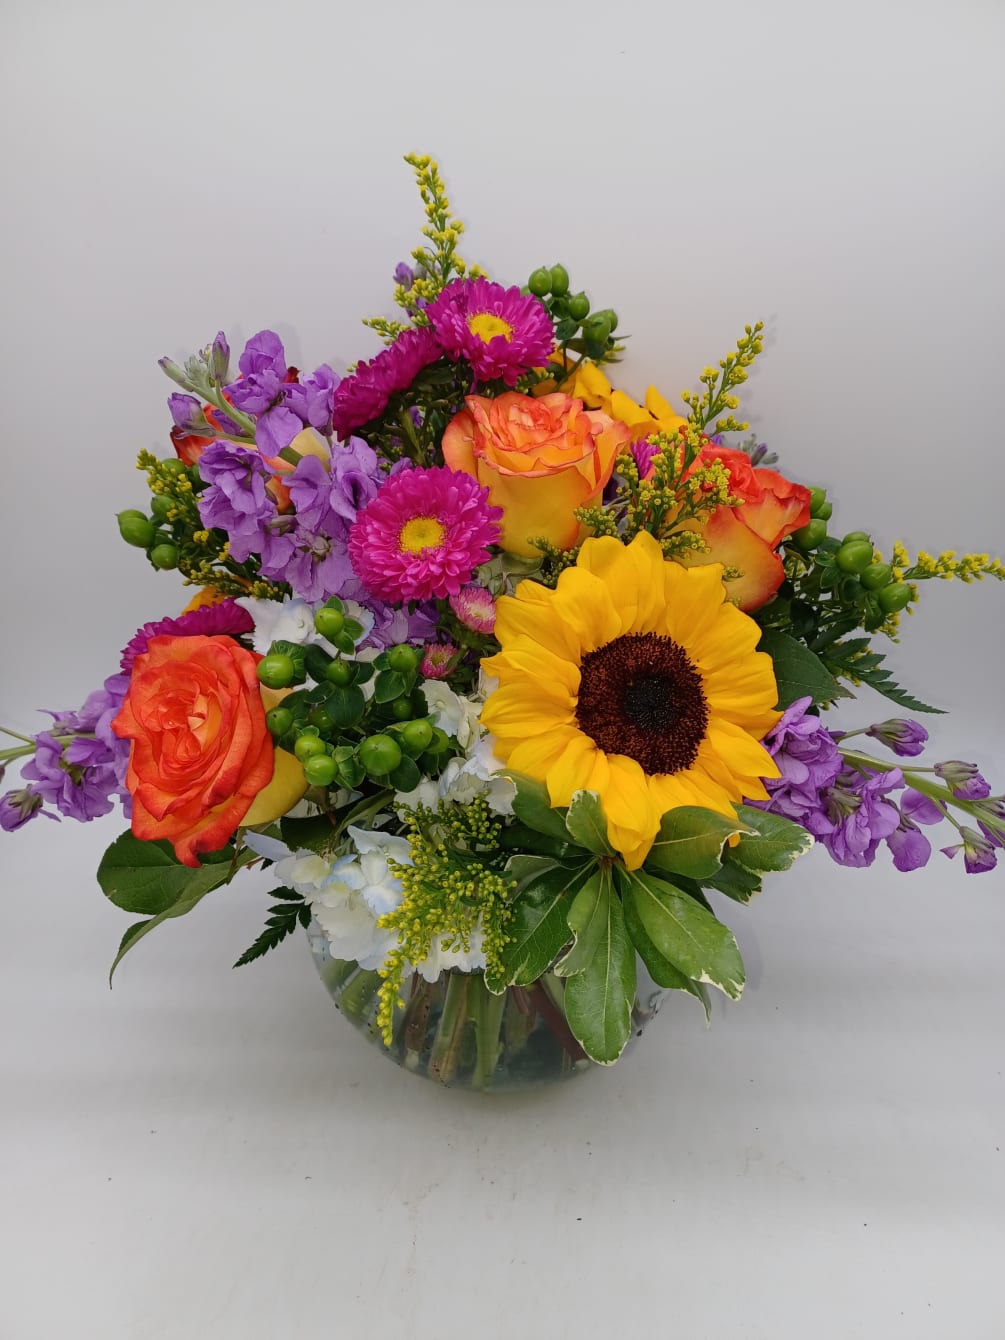 A bright and stunning mix of fresh blooms designed in a large